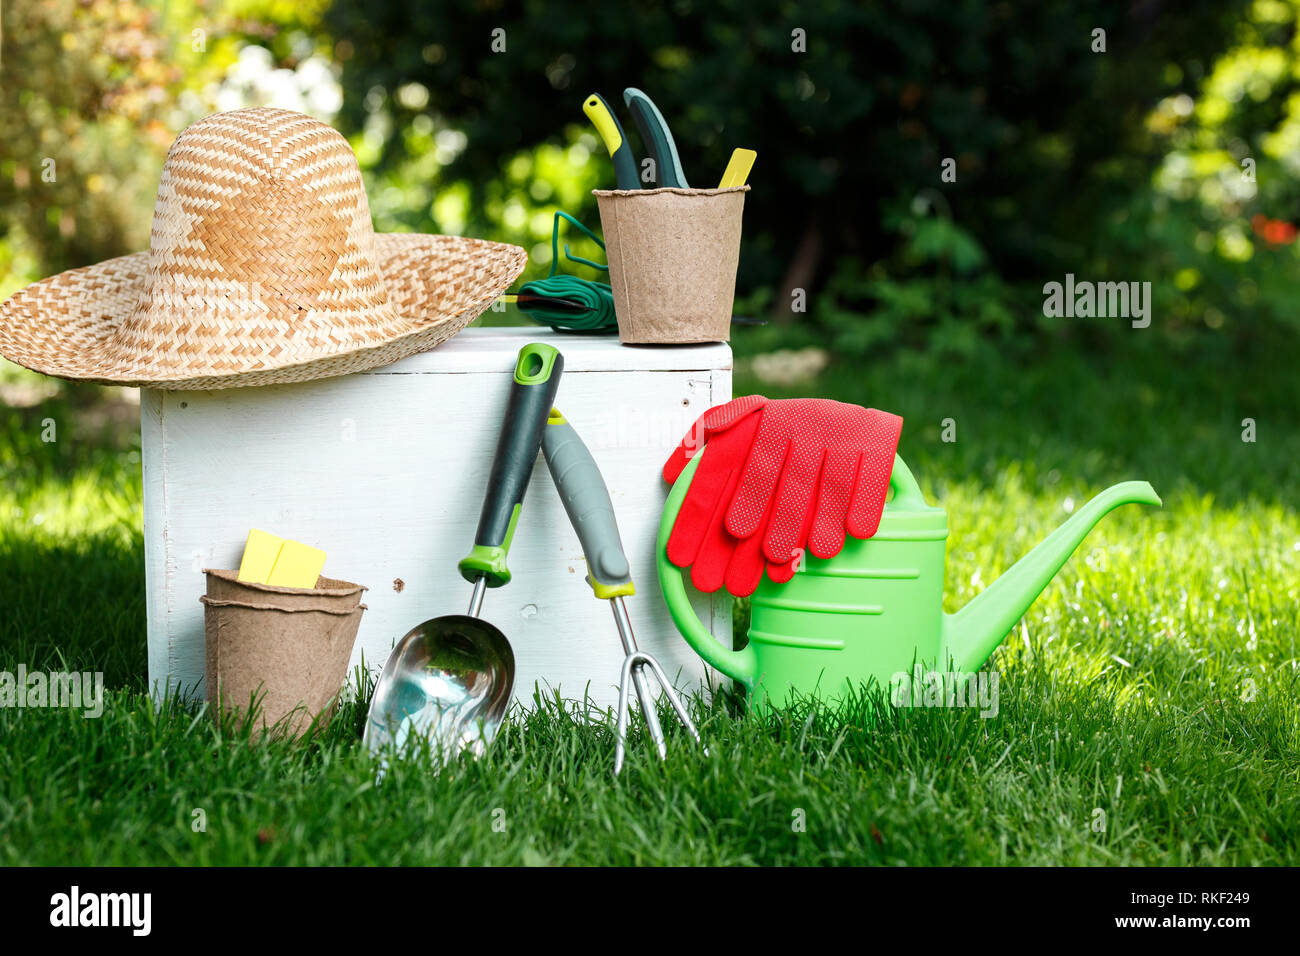 Gardening tools, gloves, straw hat and white wooden box on green grass, garden maintenance and hobby concept Stock Photo